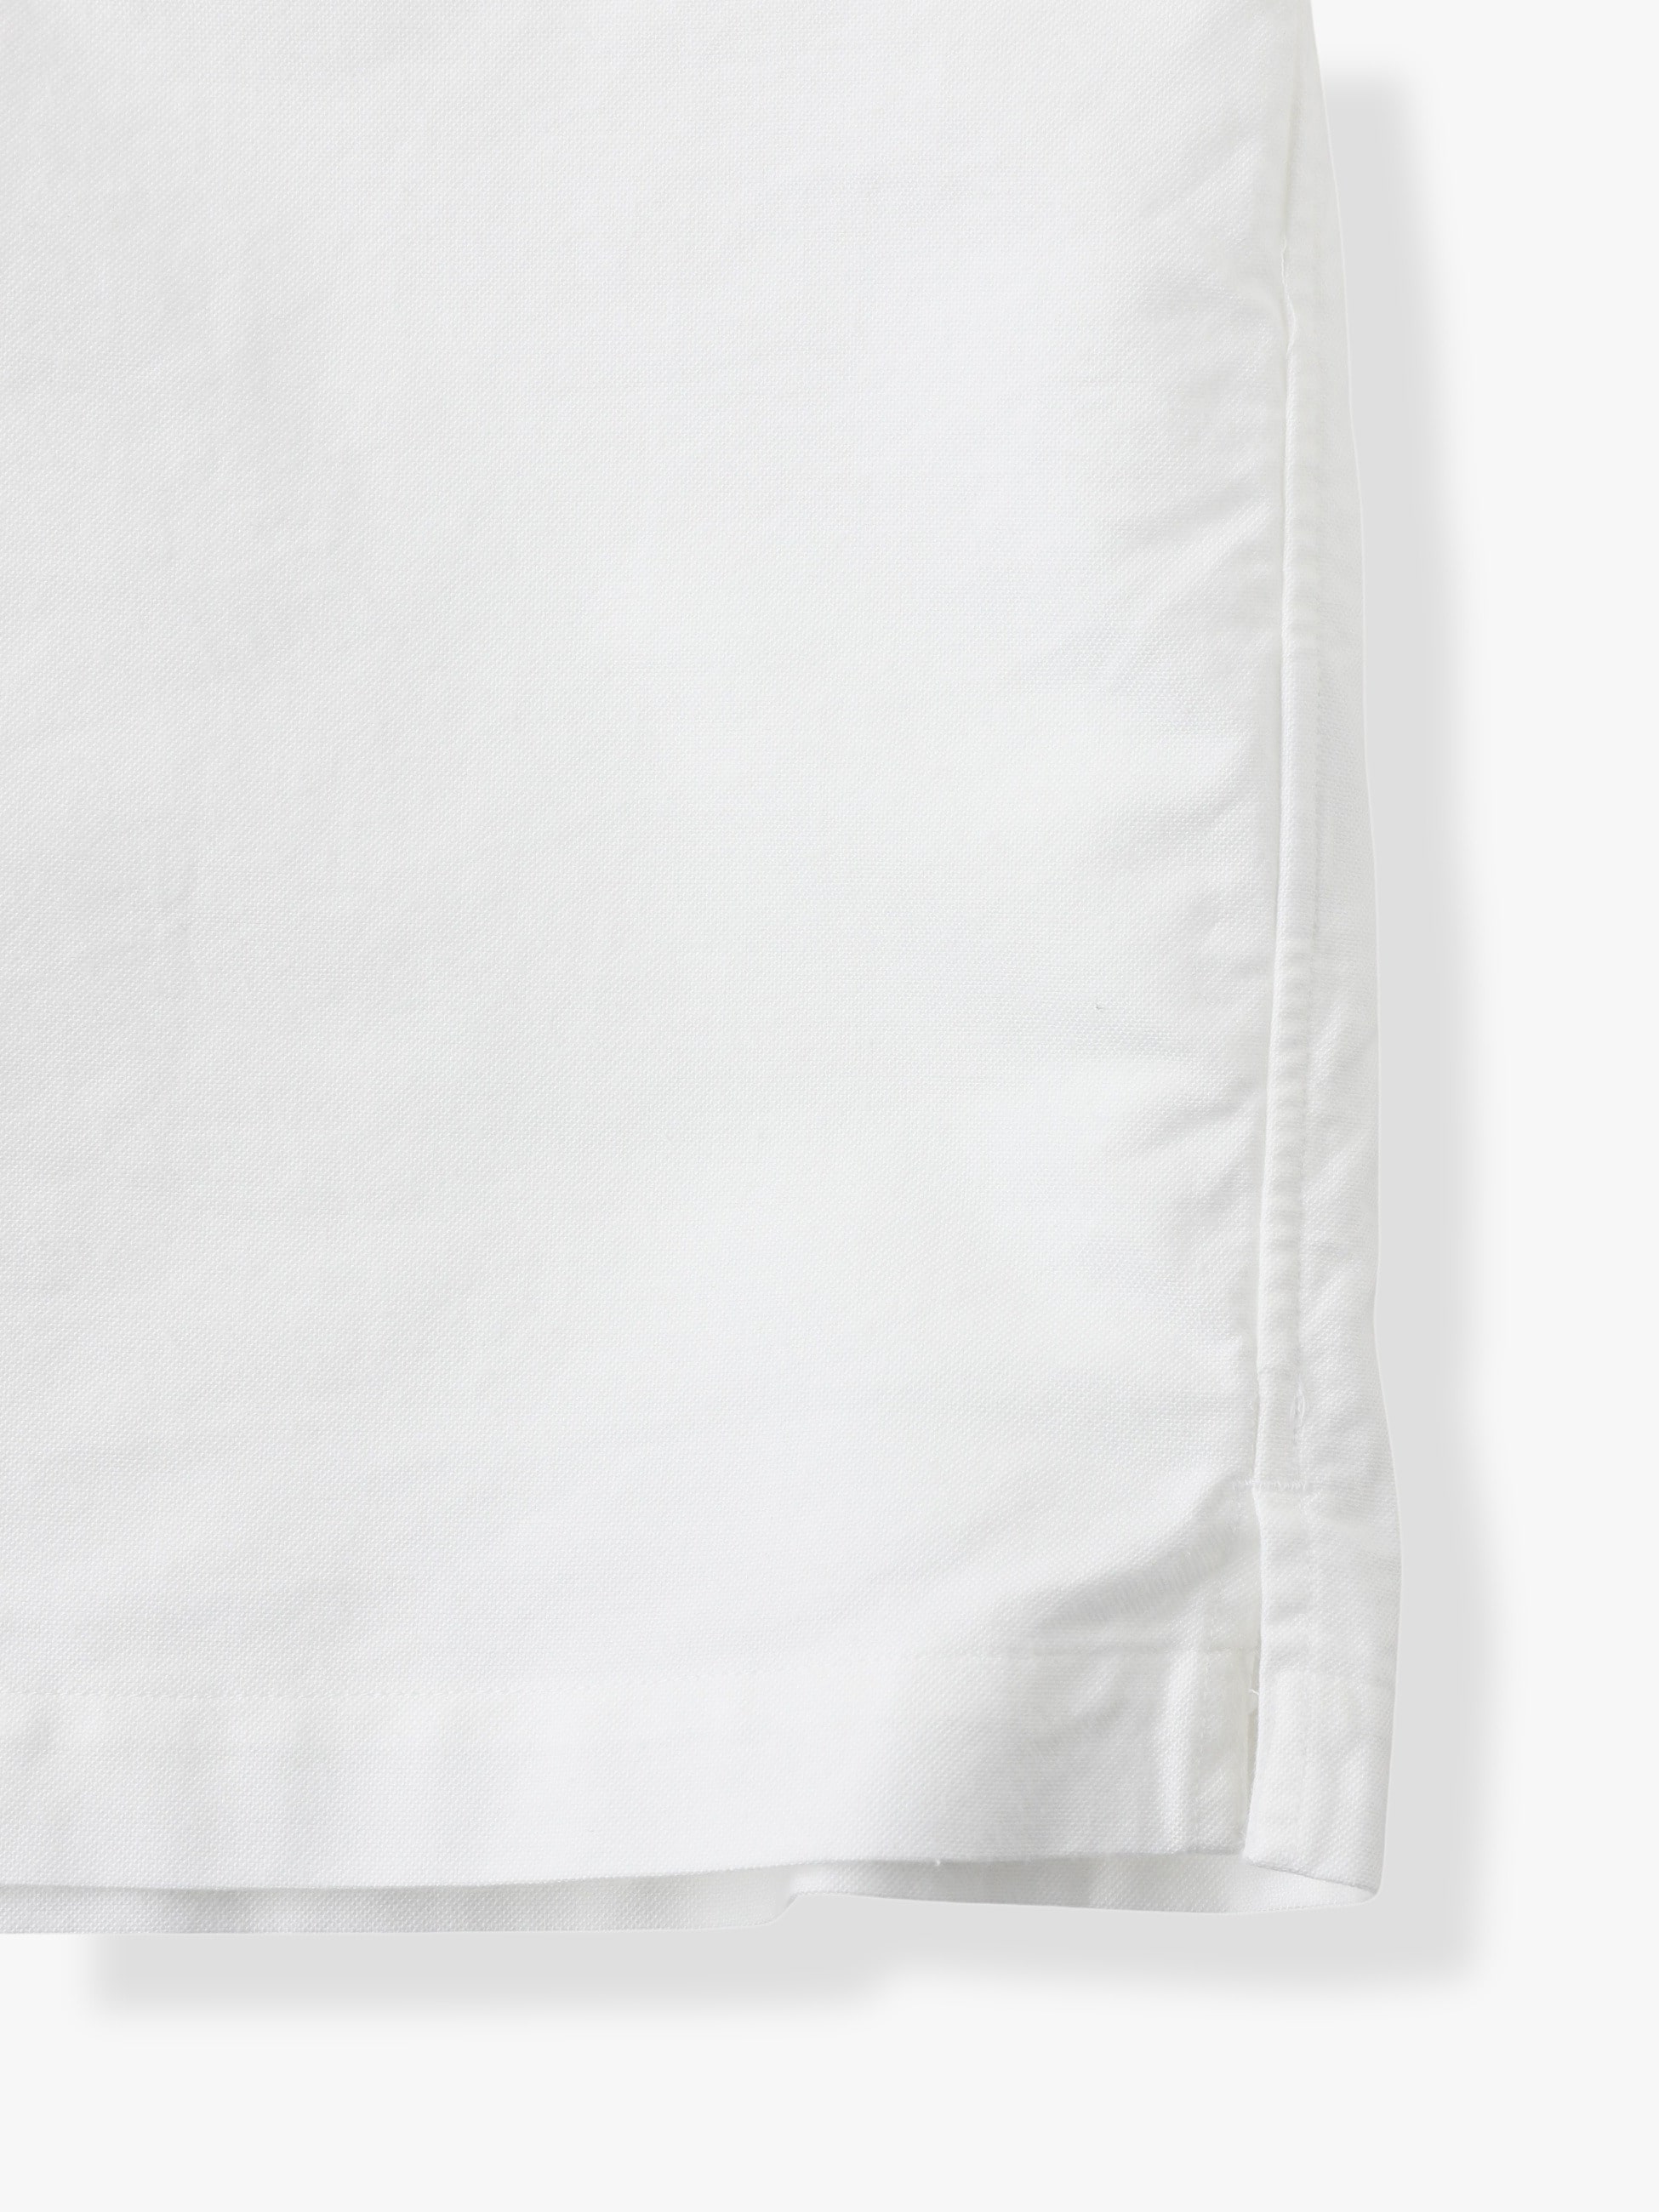 Square Tail Oxford Short Sleeve Shirt｜Brooks Brothers(ブルックス ...